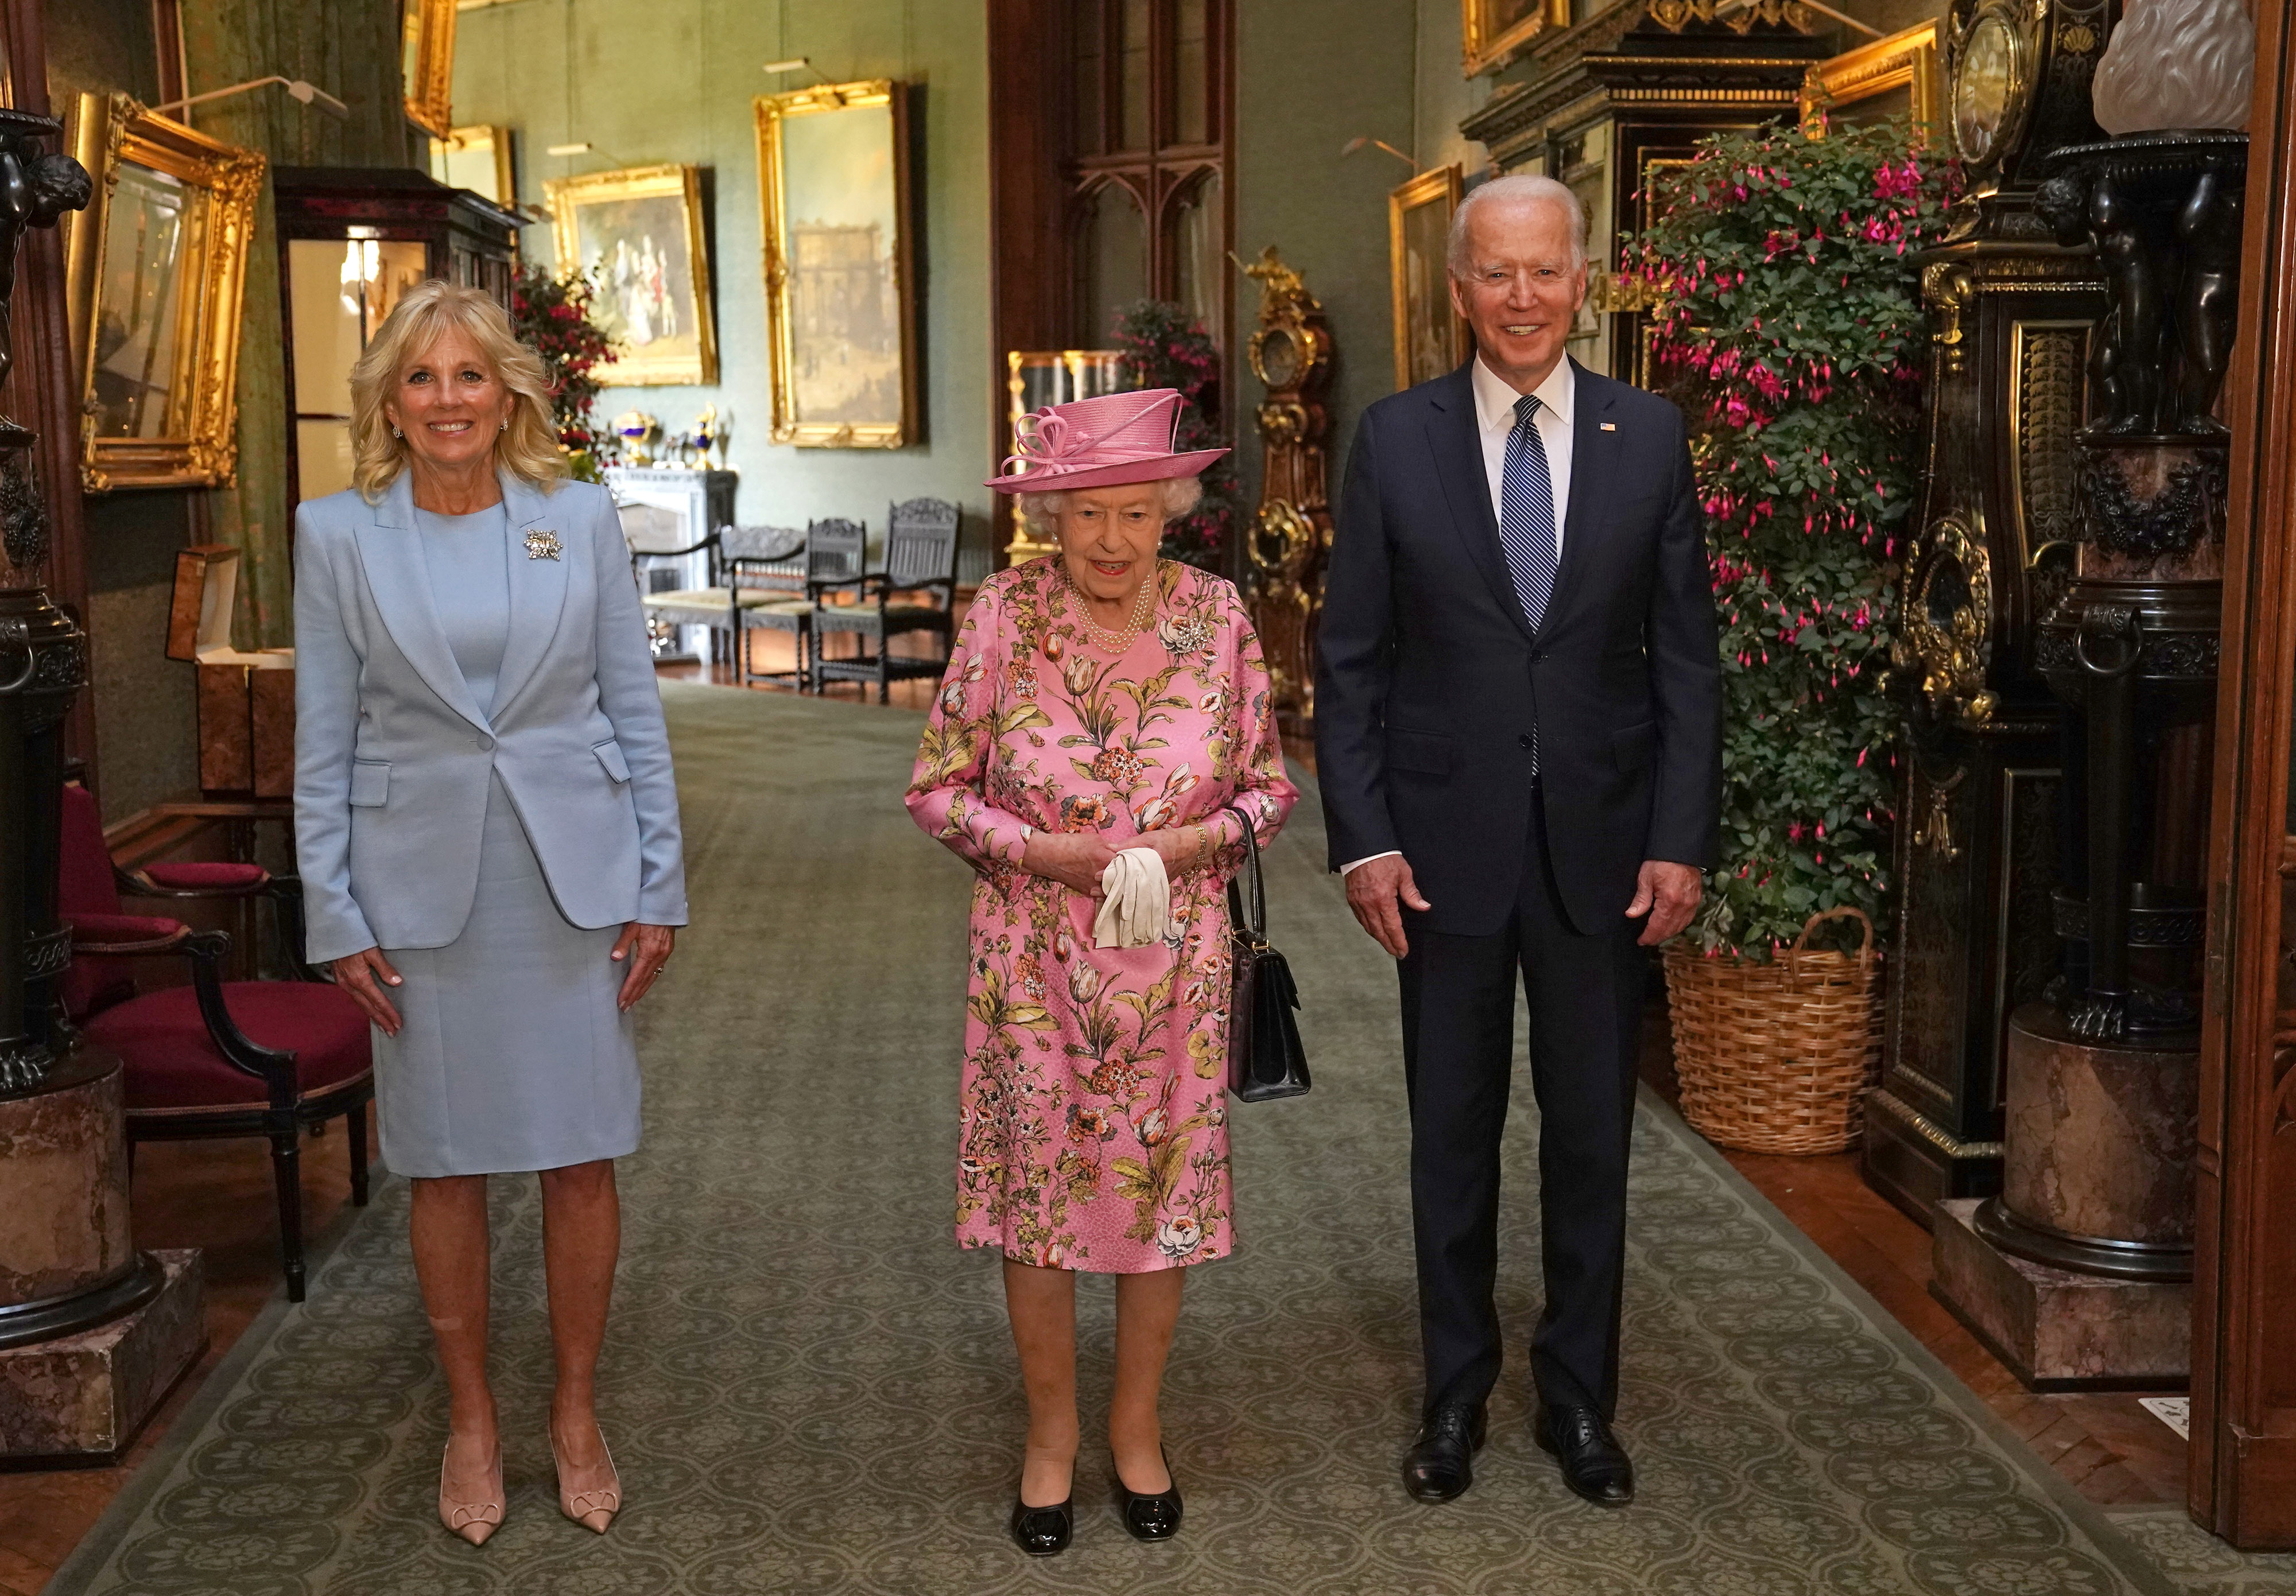 President Joe Biden and First Lady Jill Join the Queen for Tea at Windsor